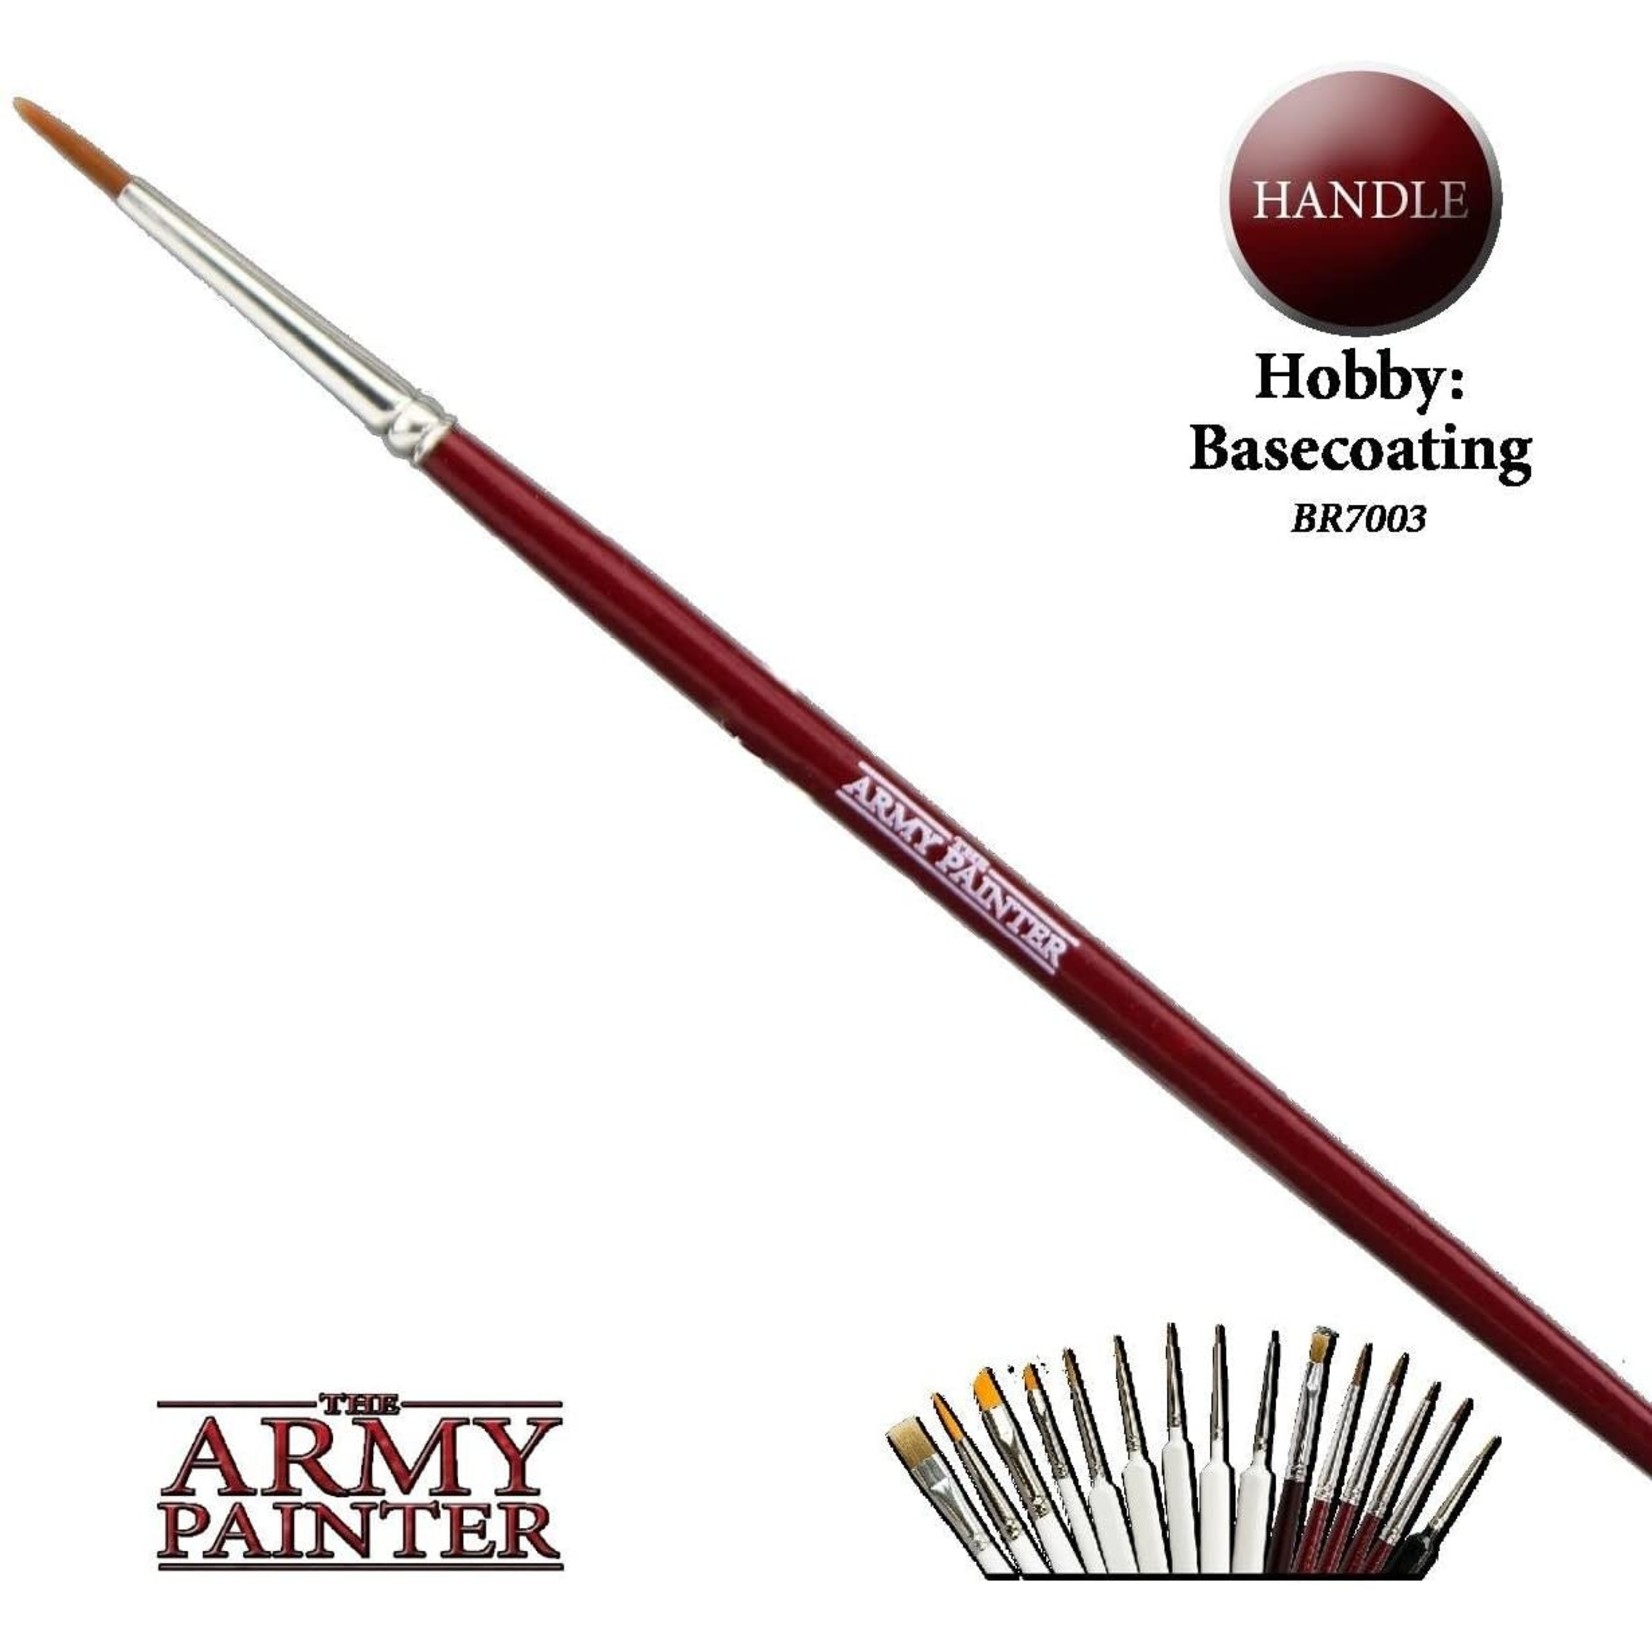 The Army Painter Hobby Basecoating Paint Brush